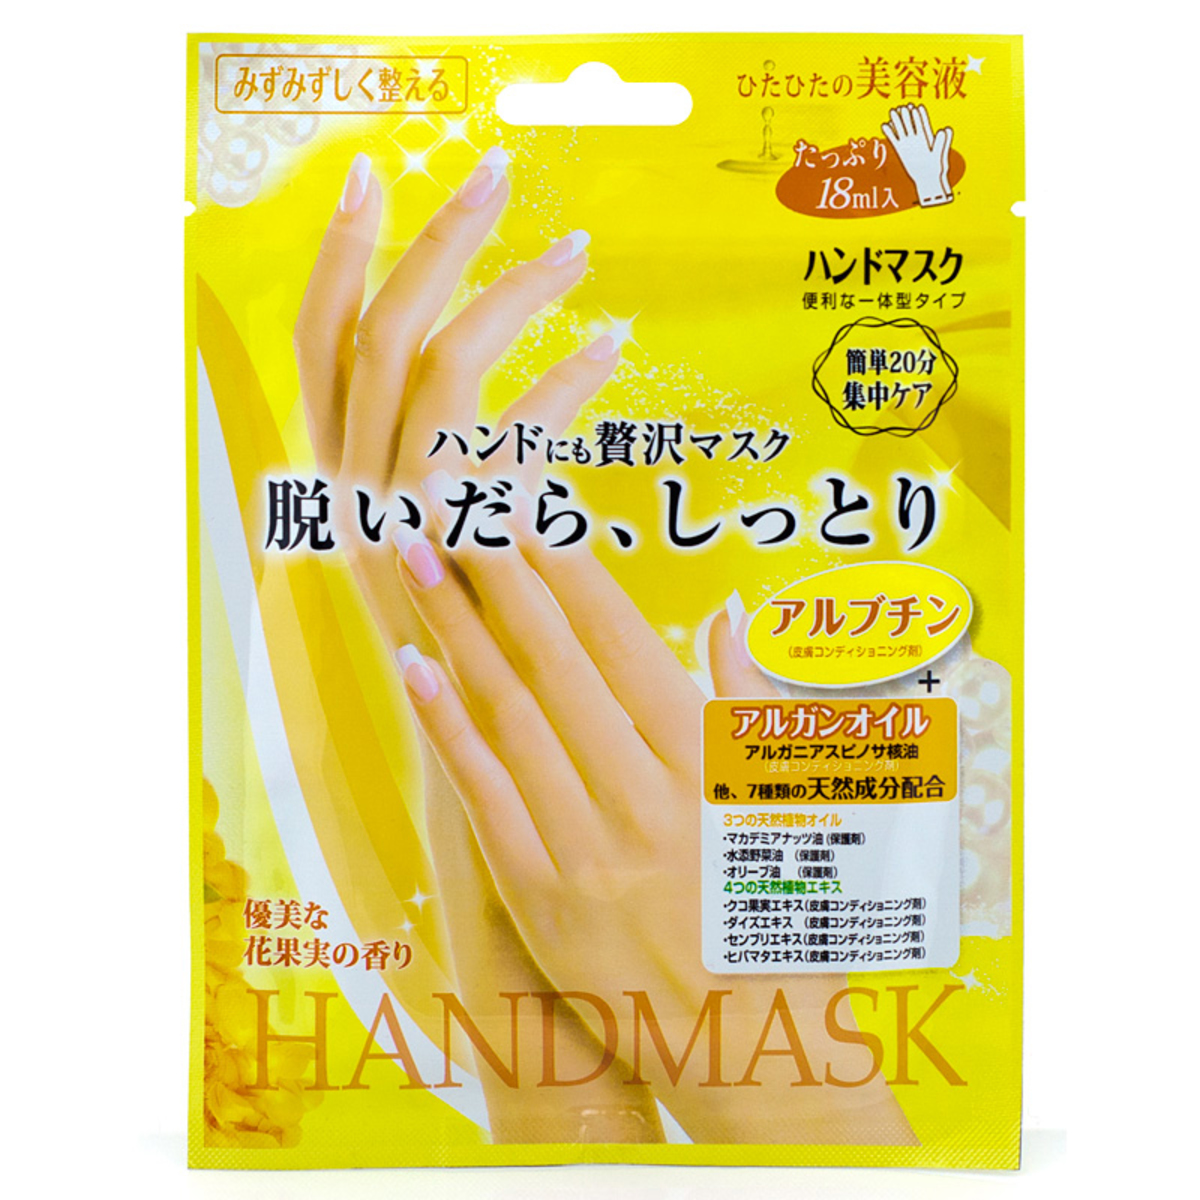 Lucky Trendy Natural Hand Mask 18ml - 1 pair